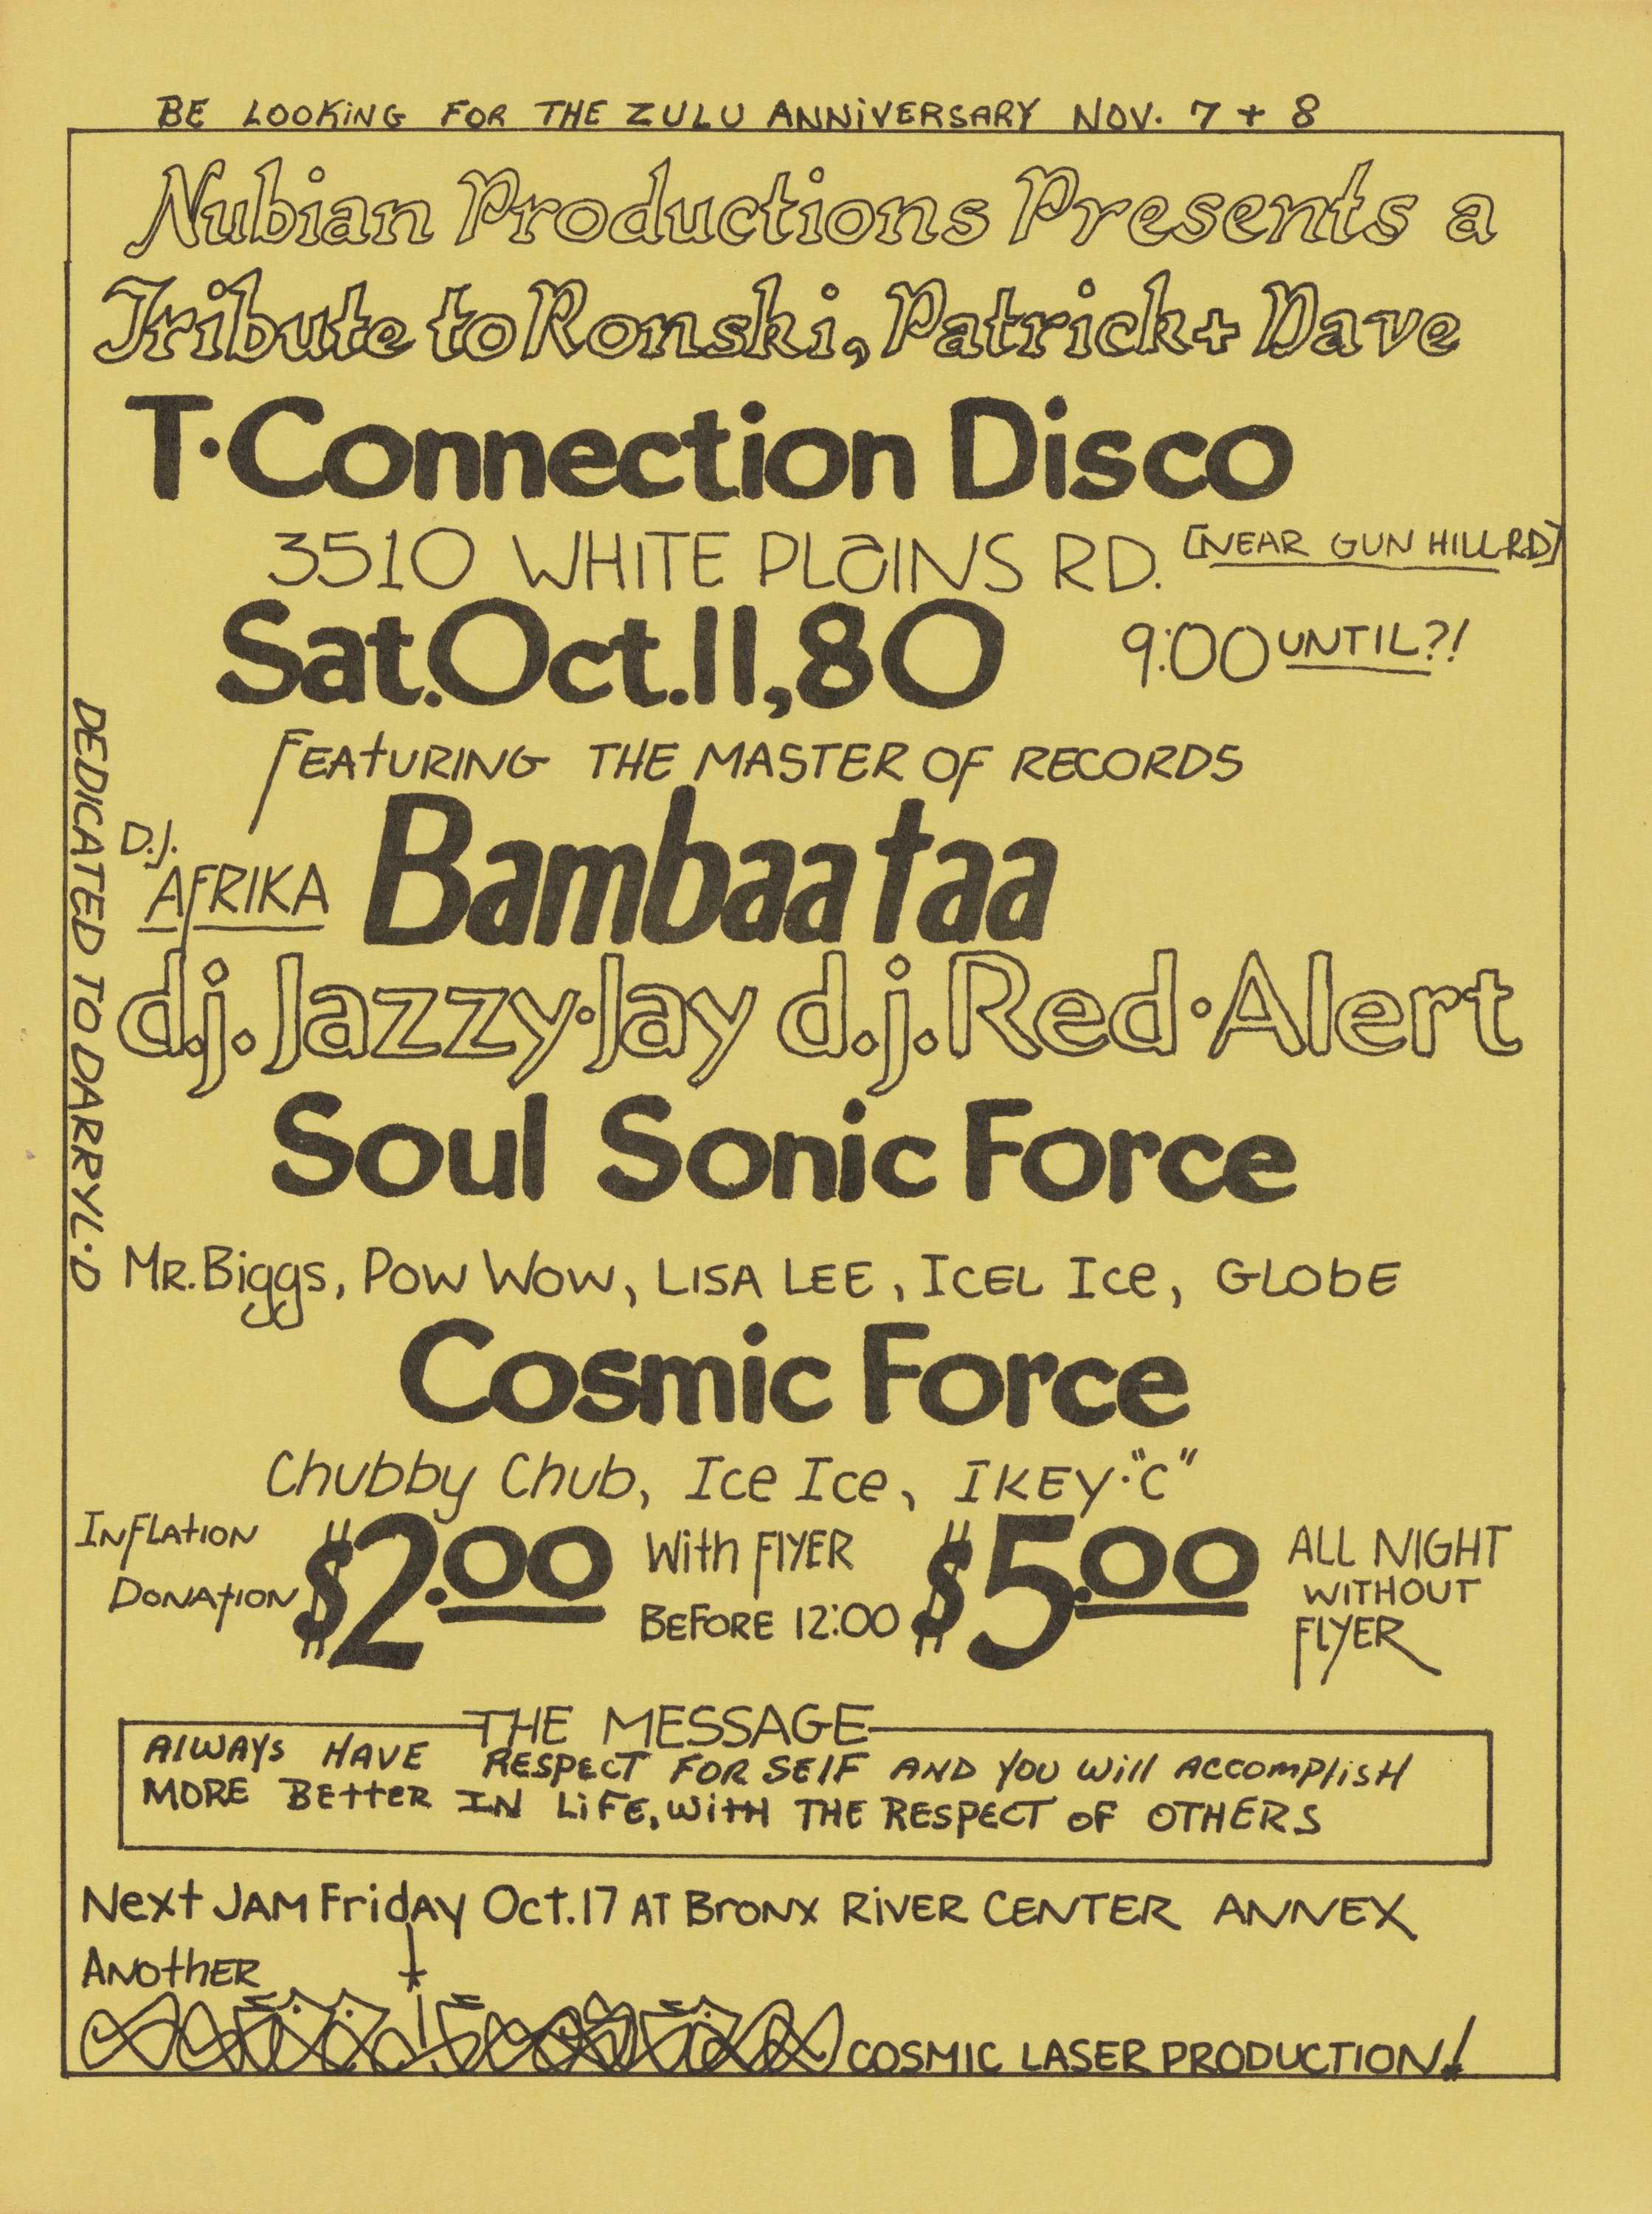 A yellow flyer with bolded typography featuring T-Connection, Bambaataa, and Soul Sonic Force.